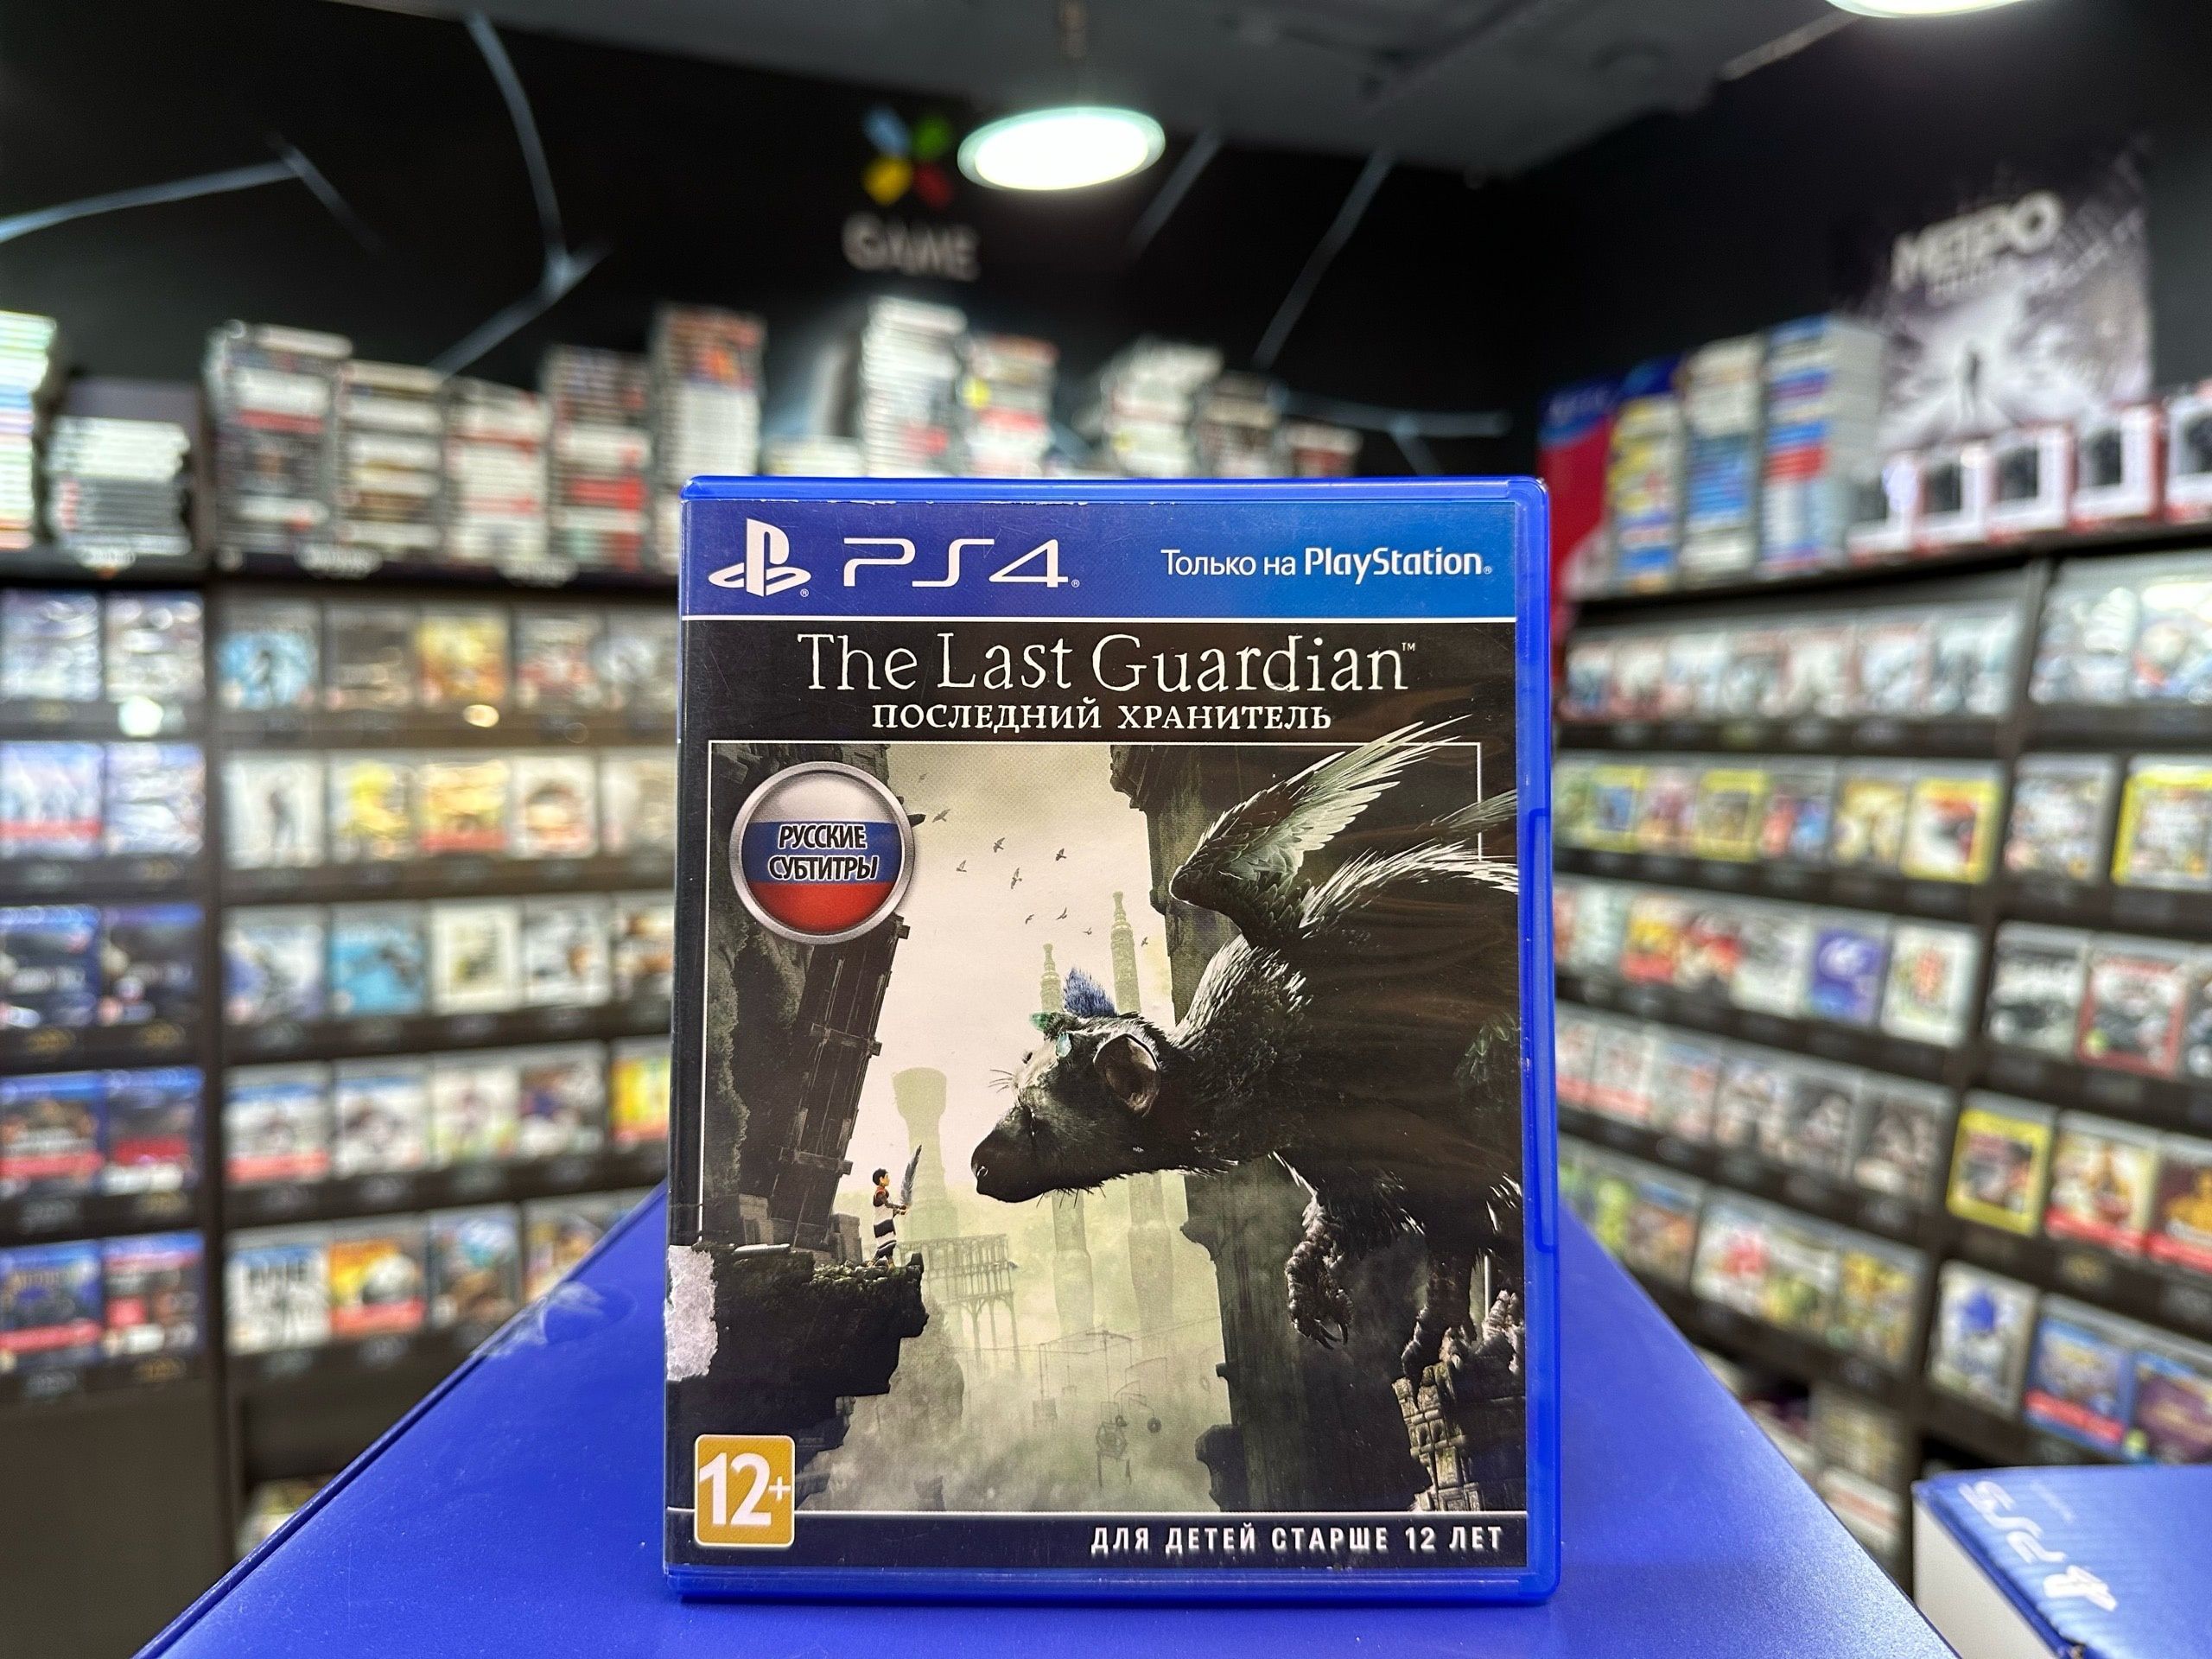 Guardian ps4. The last Guardian ps4.